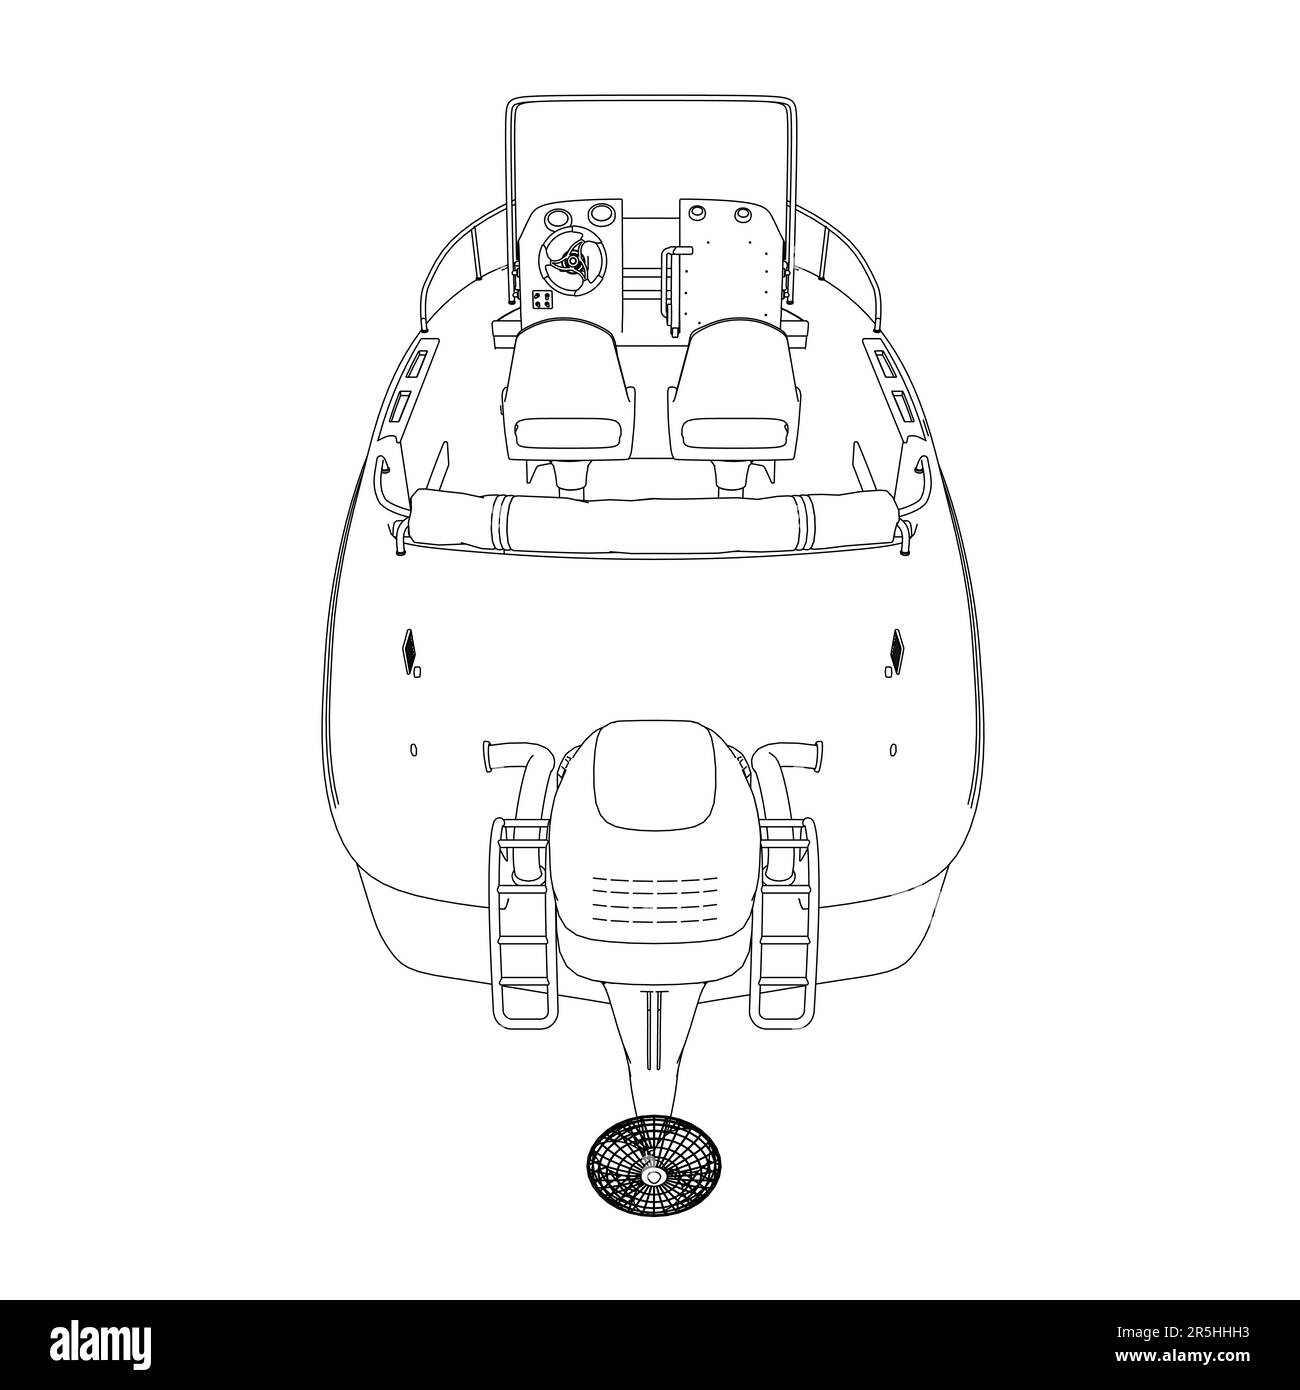 Outline of a motor boat from black lines isolated on a white background. Back view. Vector illustration. Stock Vector